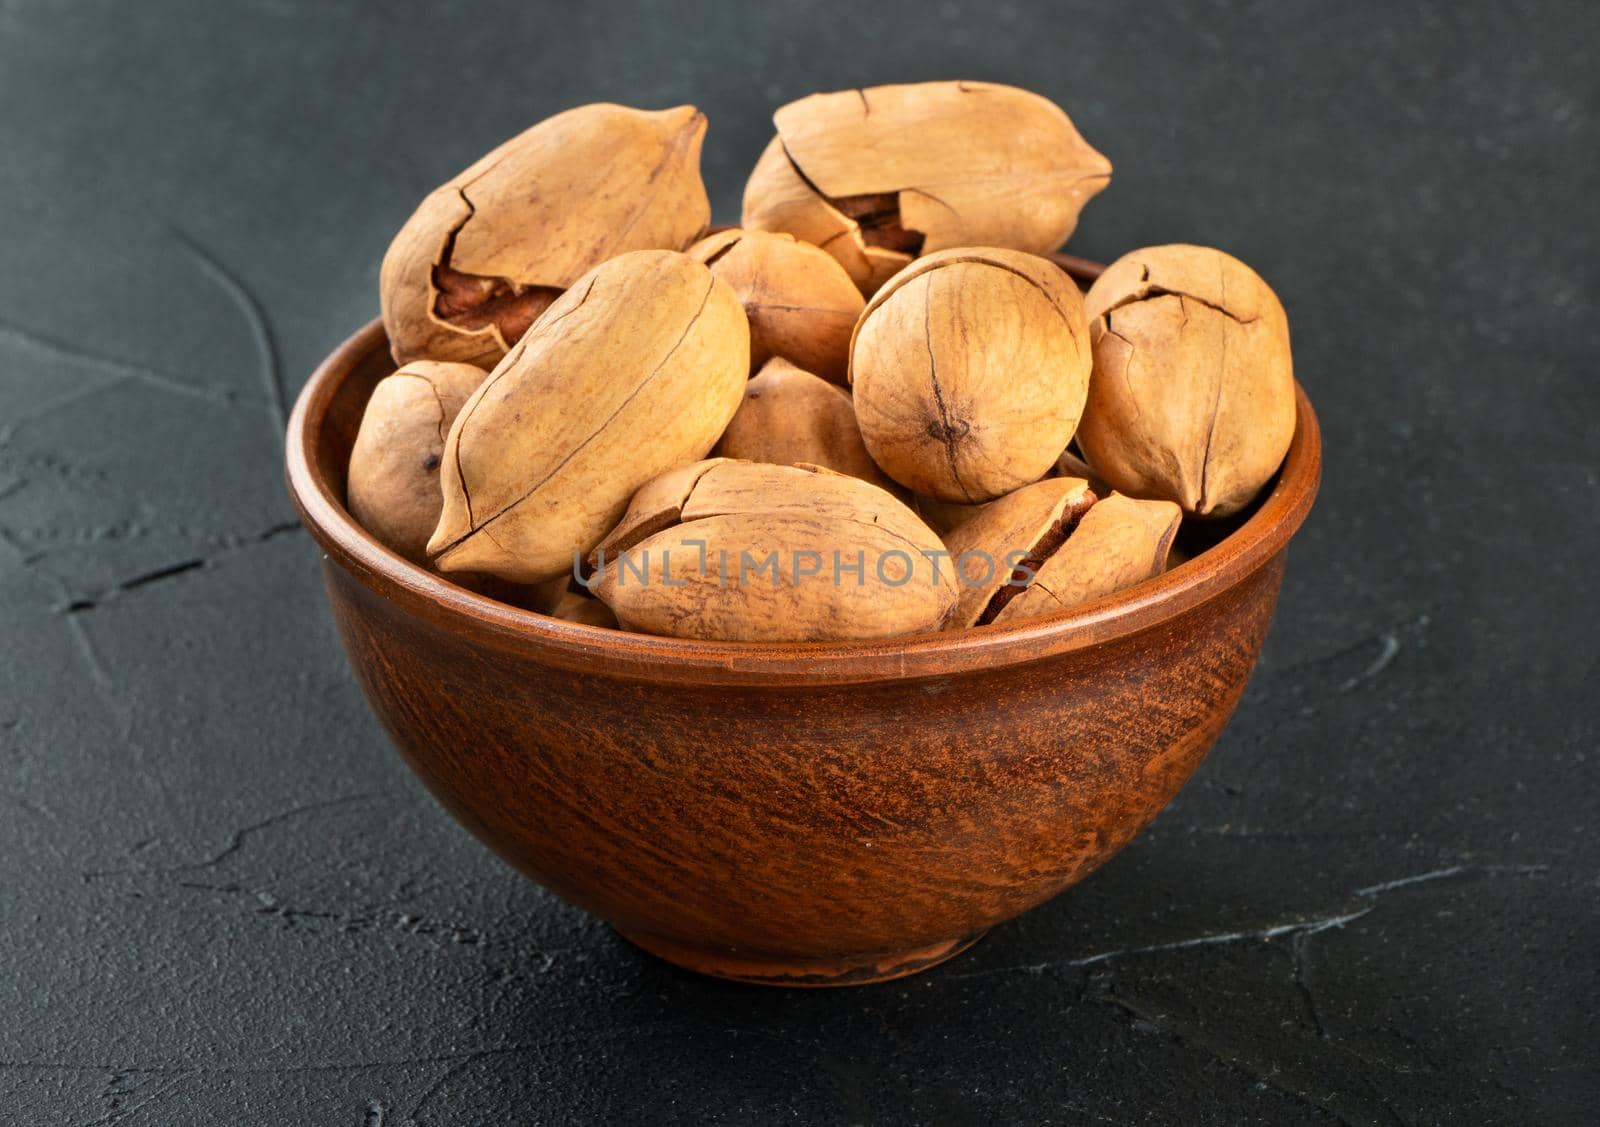 Pecan nuts in a bowl on a dark concrete background.